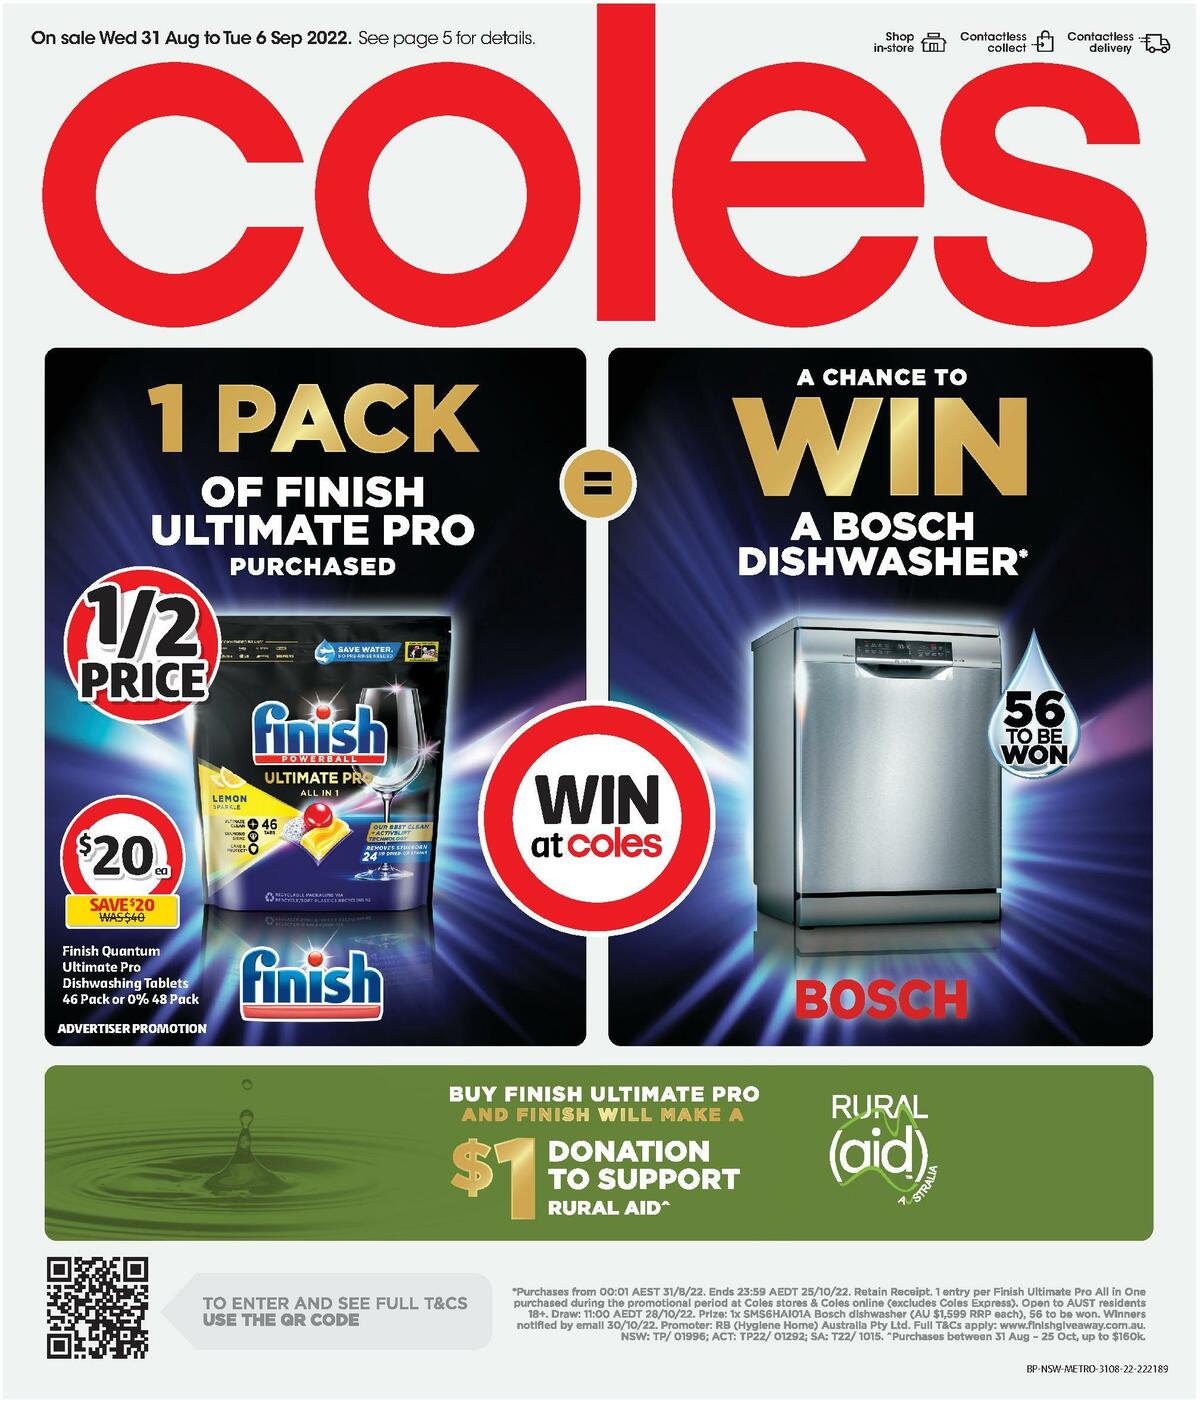 Coles Spring Cleaning Catalogues from 31 August